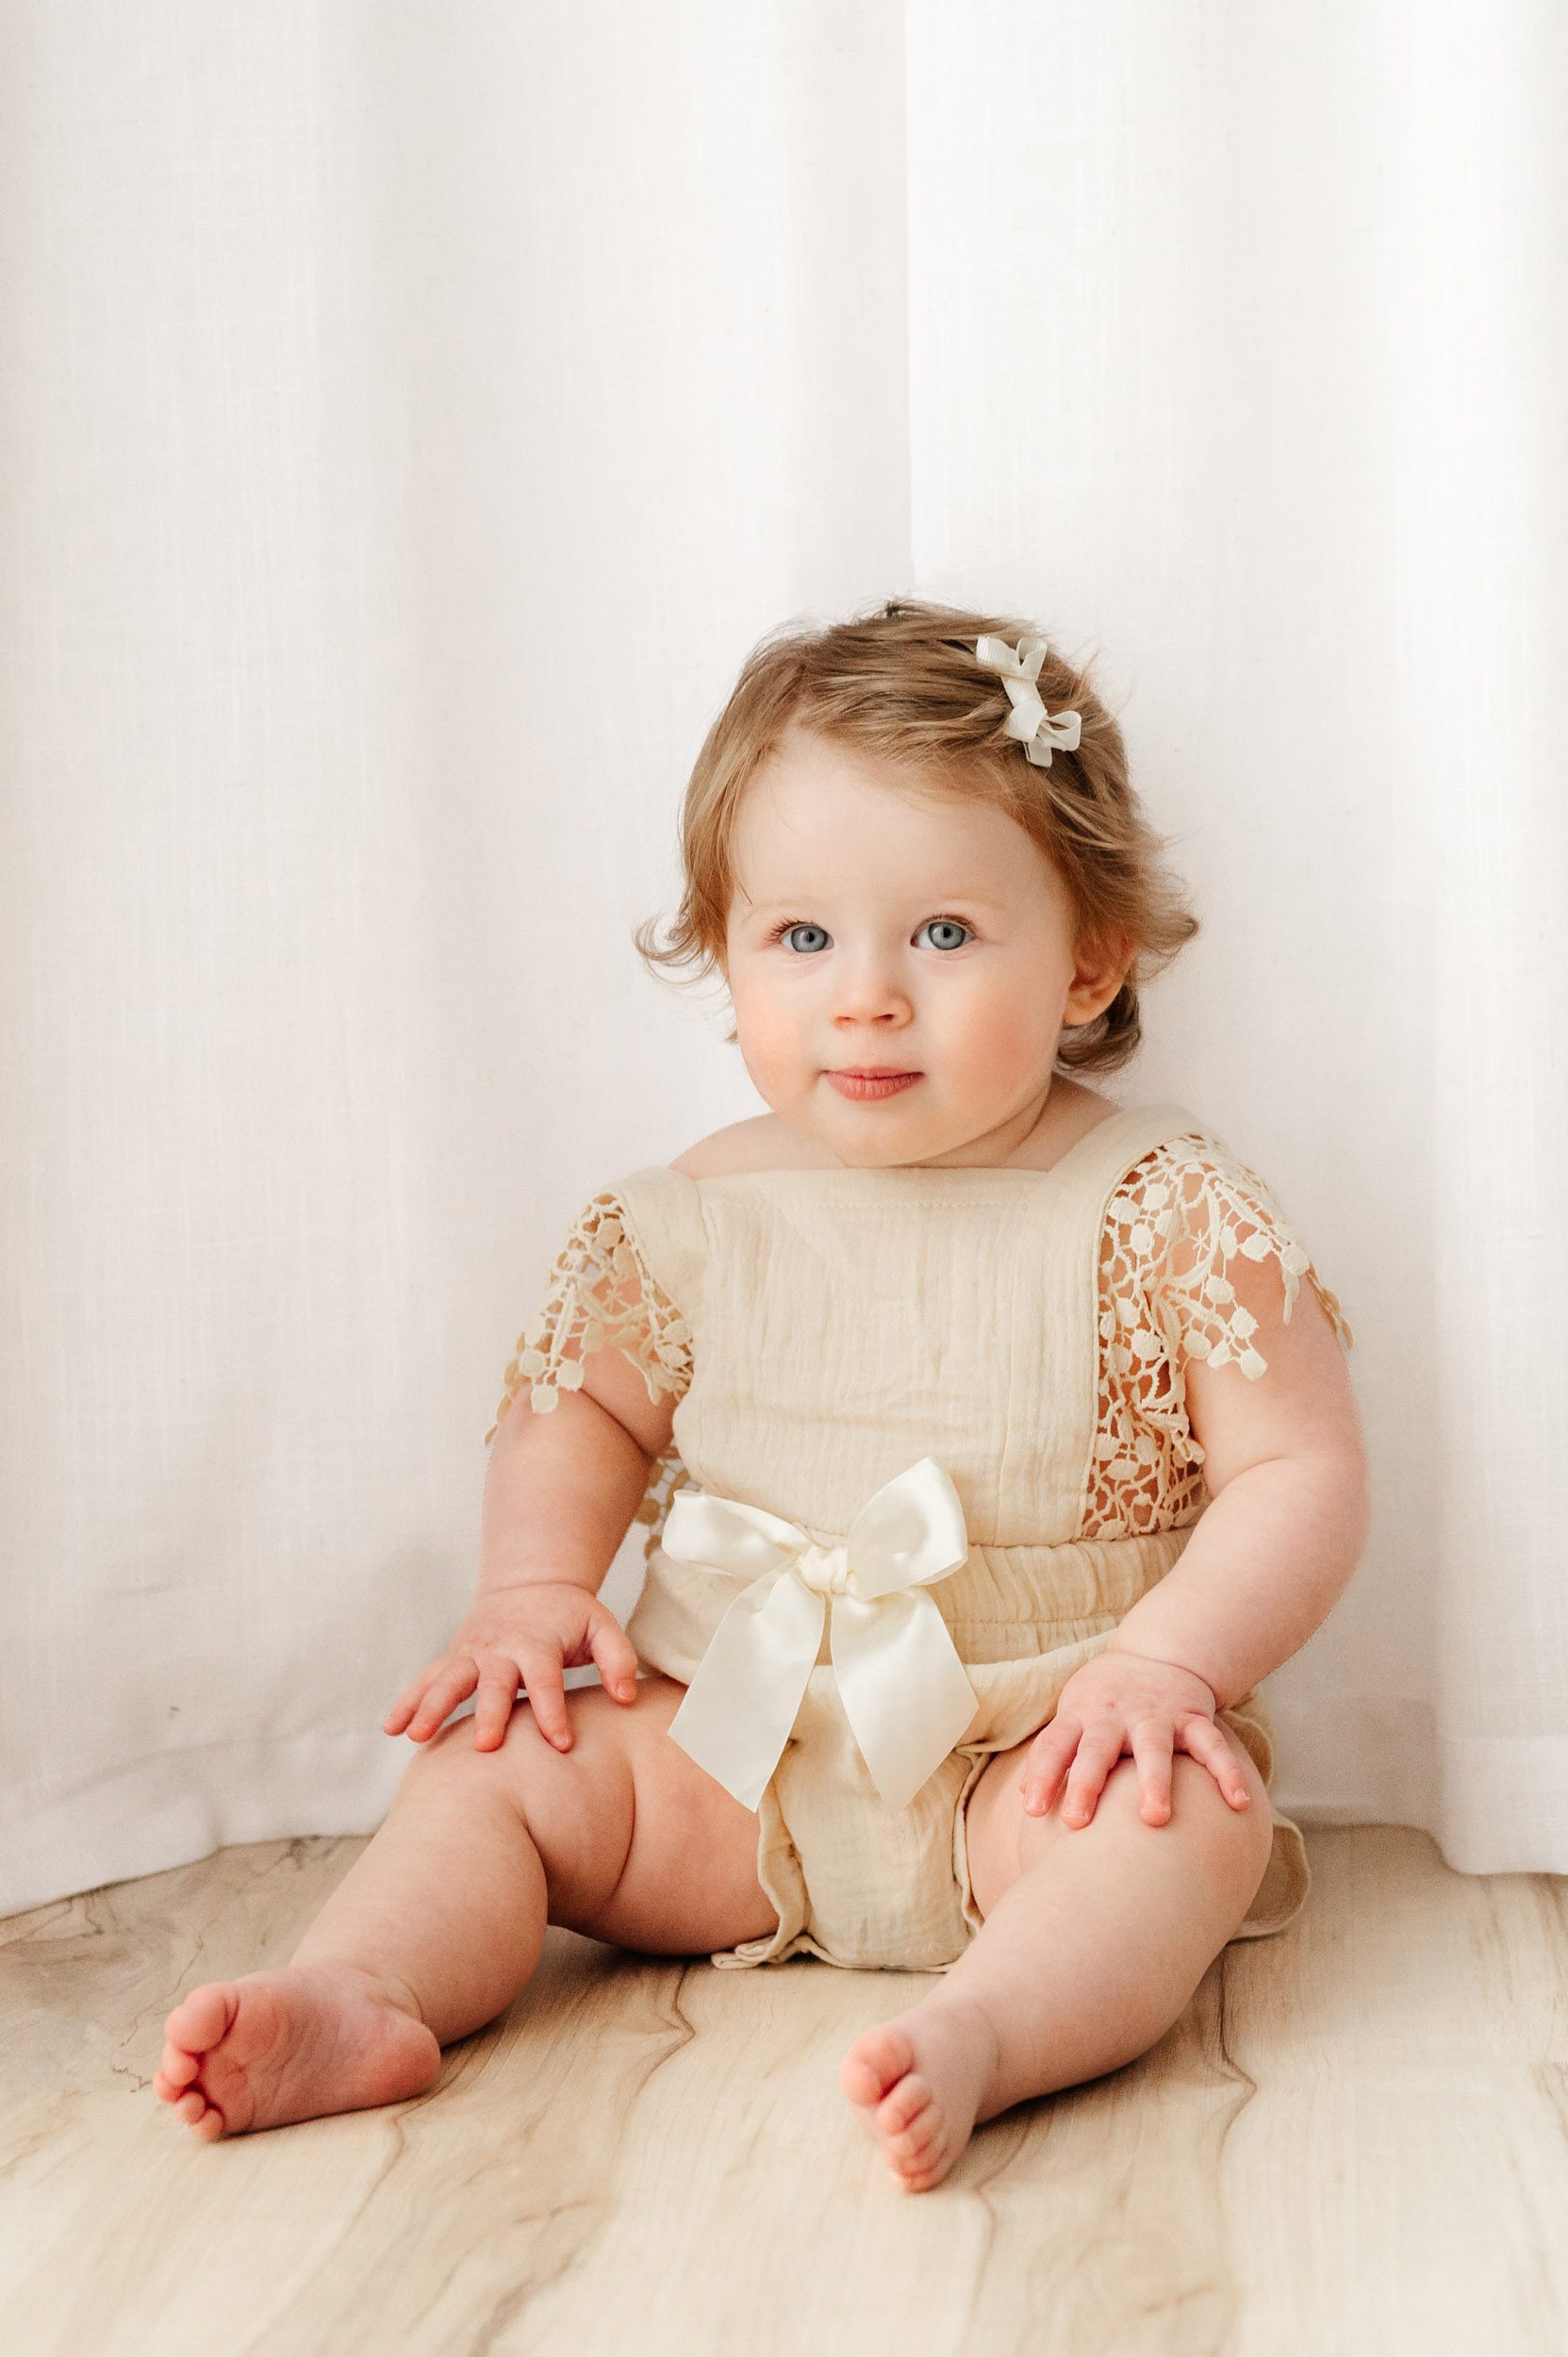 a young girl sitting in front of a white curtain and resting her hands on her knees as she looks up at her parents during a baby milestone photo session